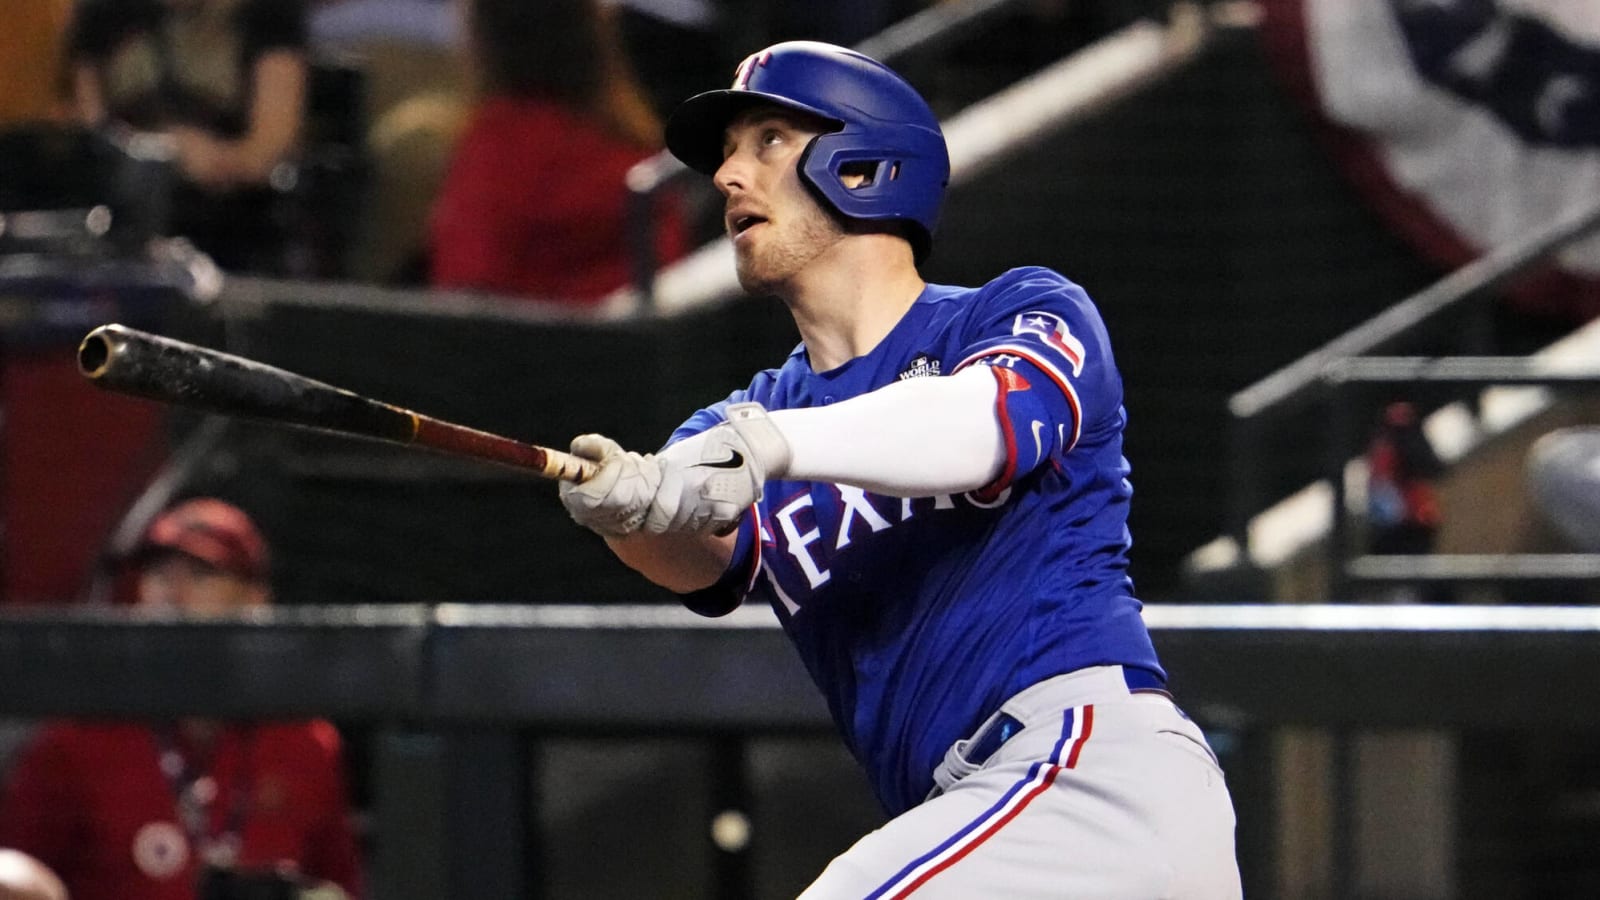 Notable Rangers champion does not get qualifying offer from team